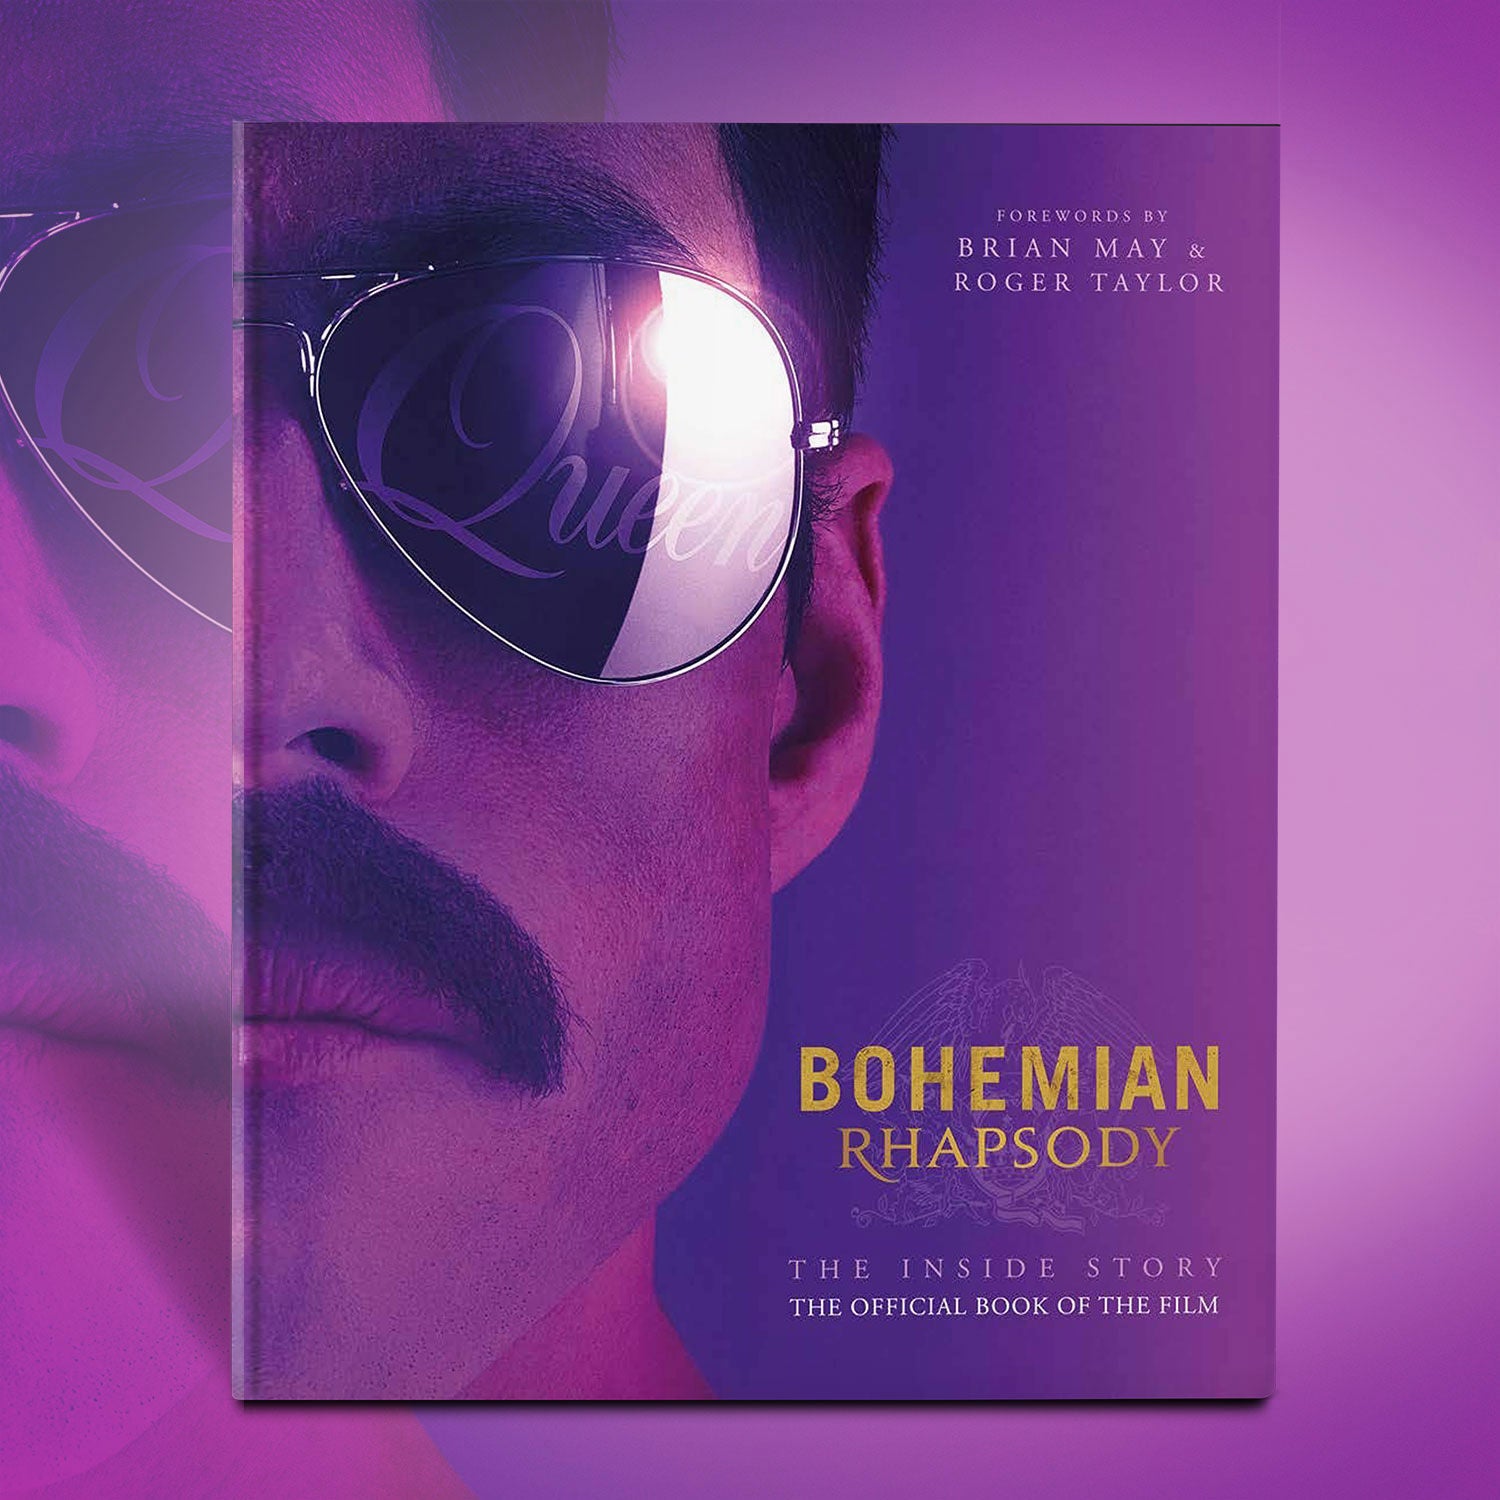 Queen - Bohemian Rhapsody The Official Book of the Film